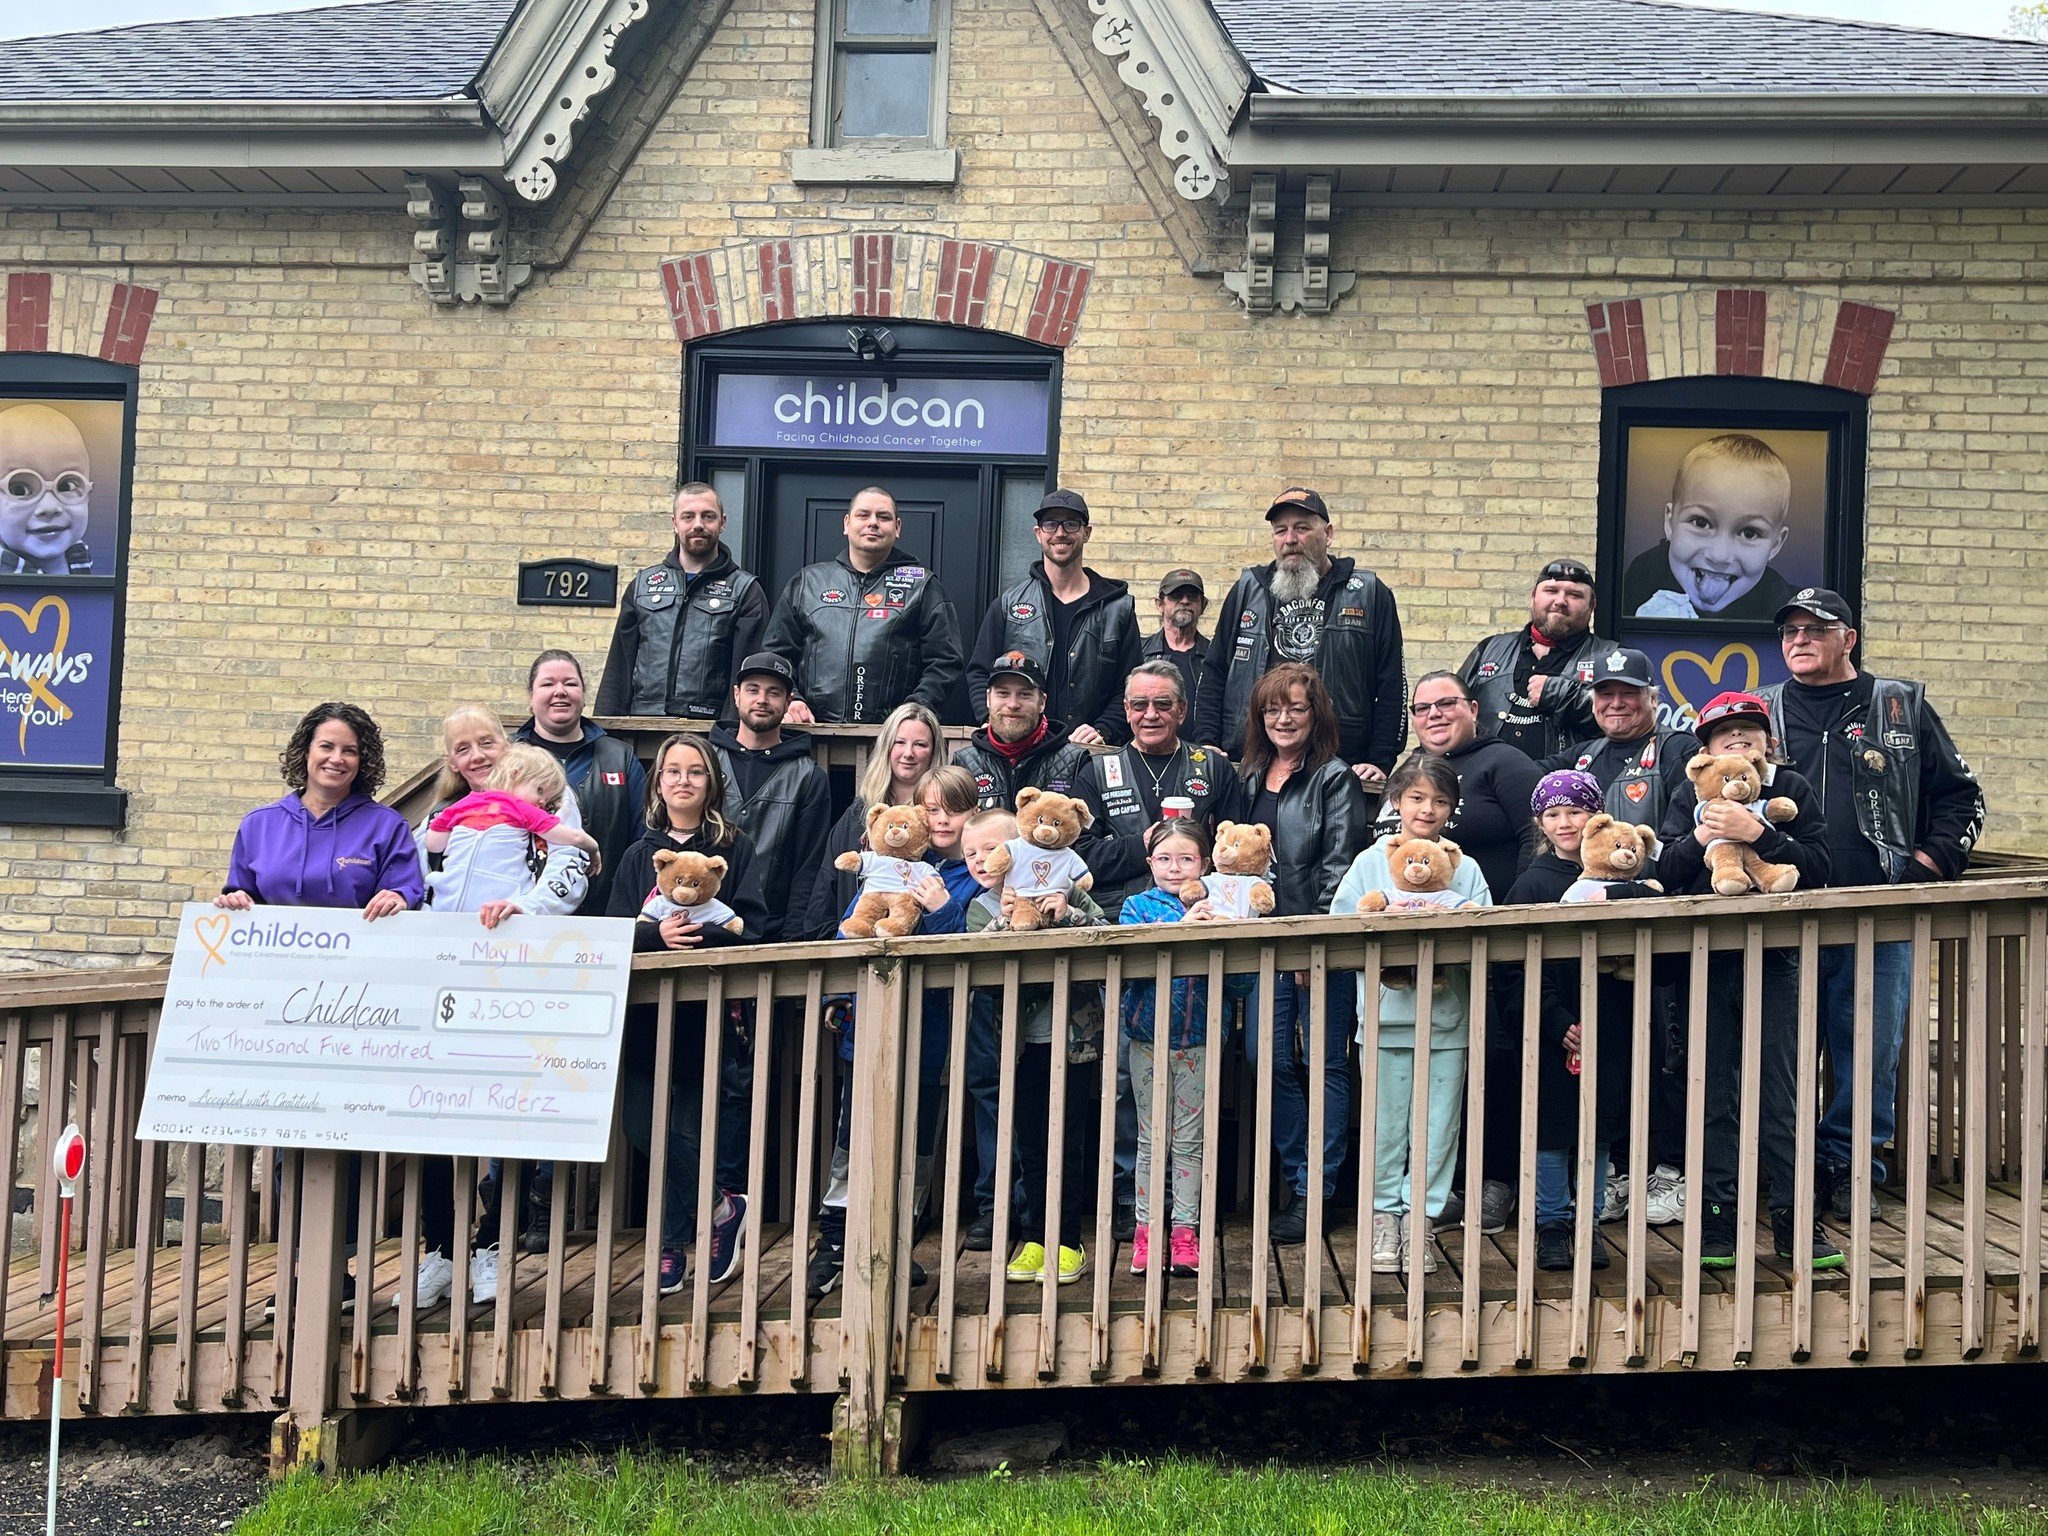 Well, the weather wasn't quite what we were hoping for on Saturday morning, but the @originalriderzrc stopped by our office and brought some sunshine to our hearts. We are so grateful for their ongoing loyal support. We are #FacingChildhoodCancerToge